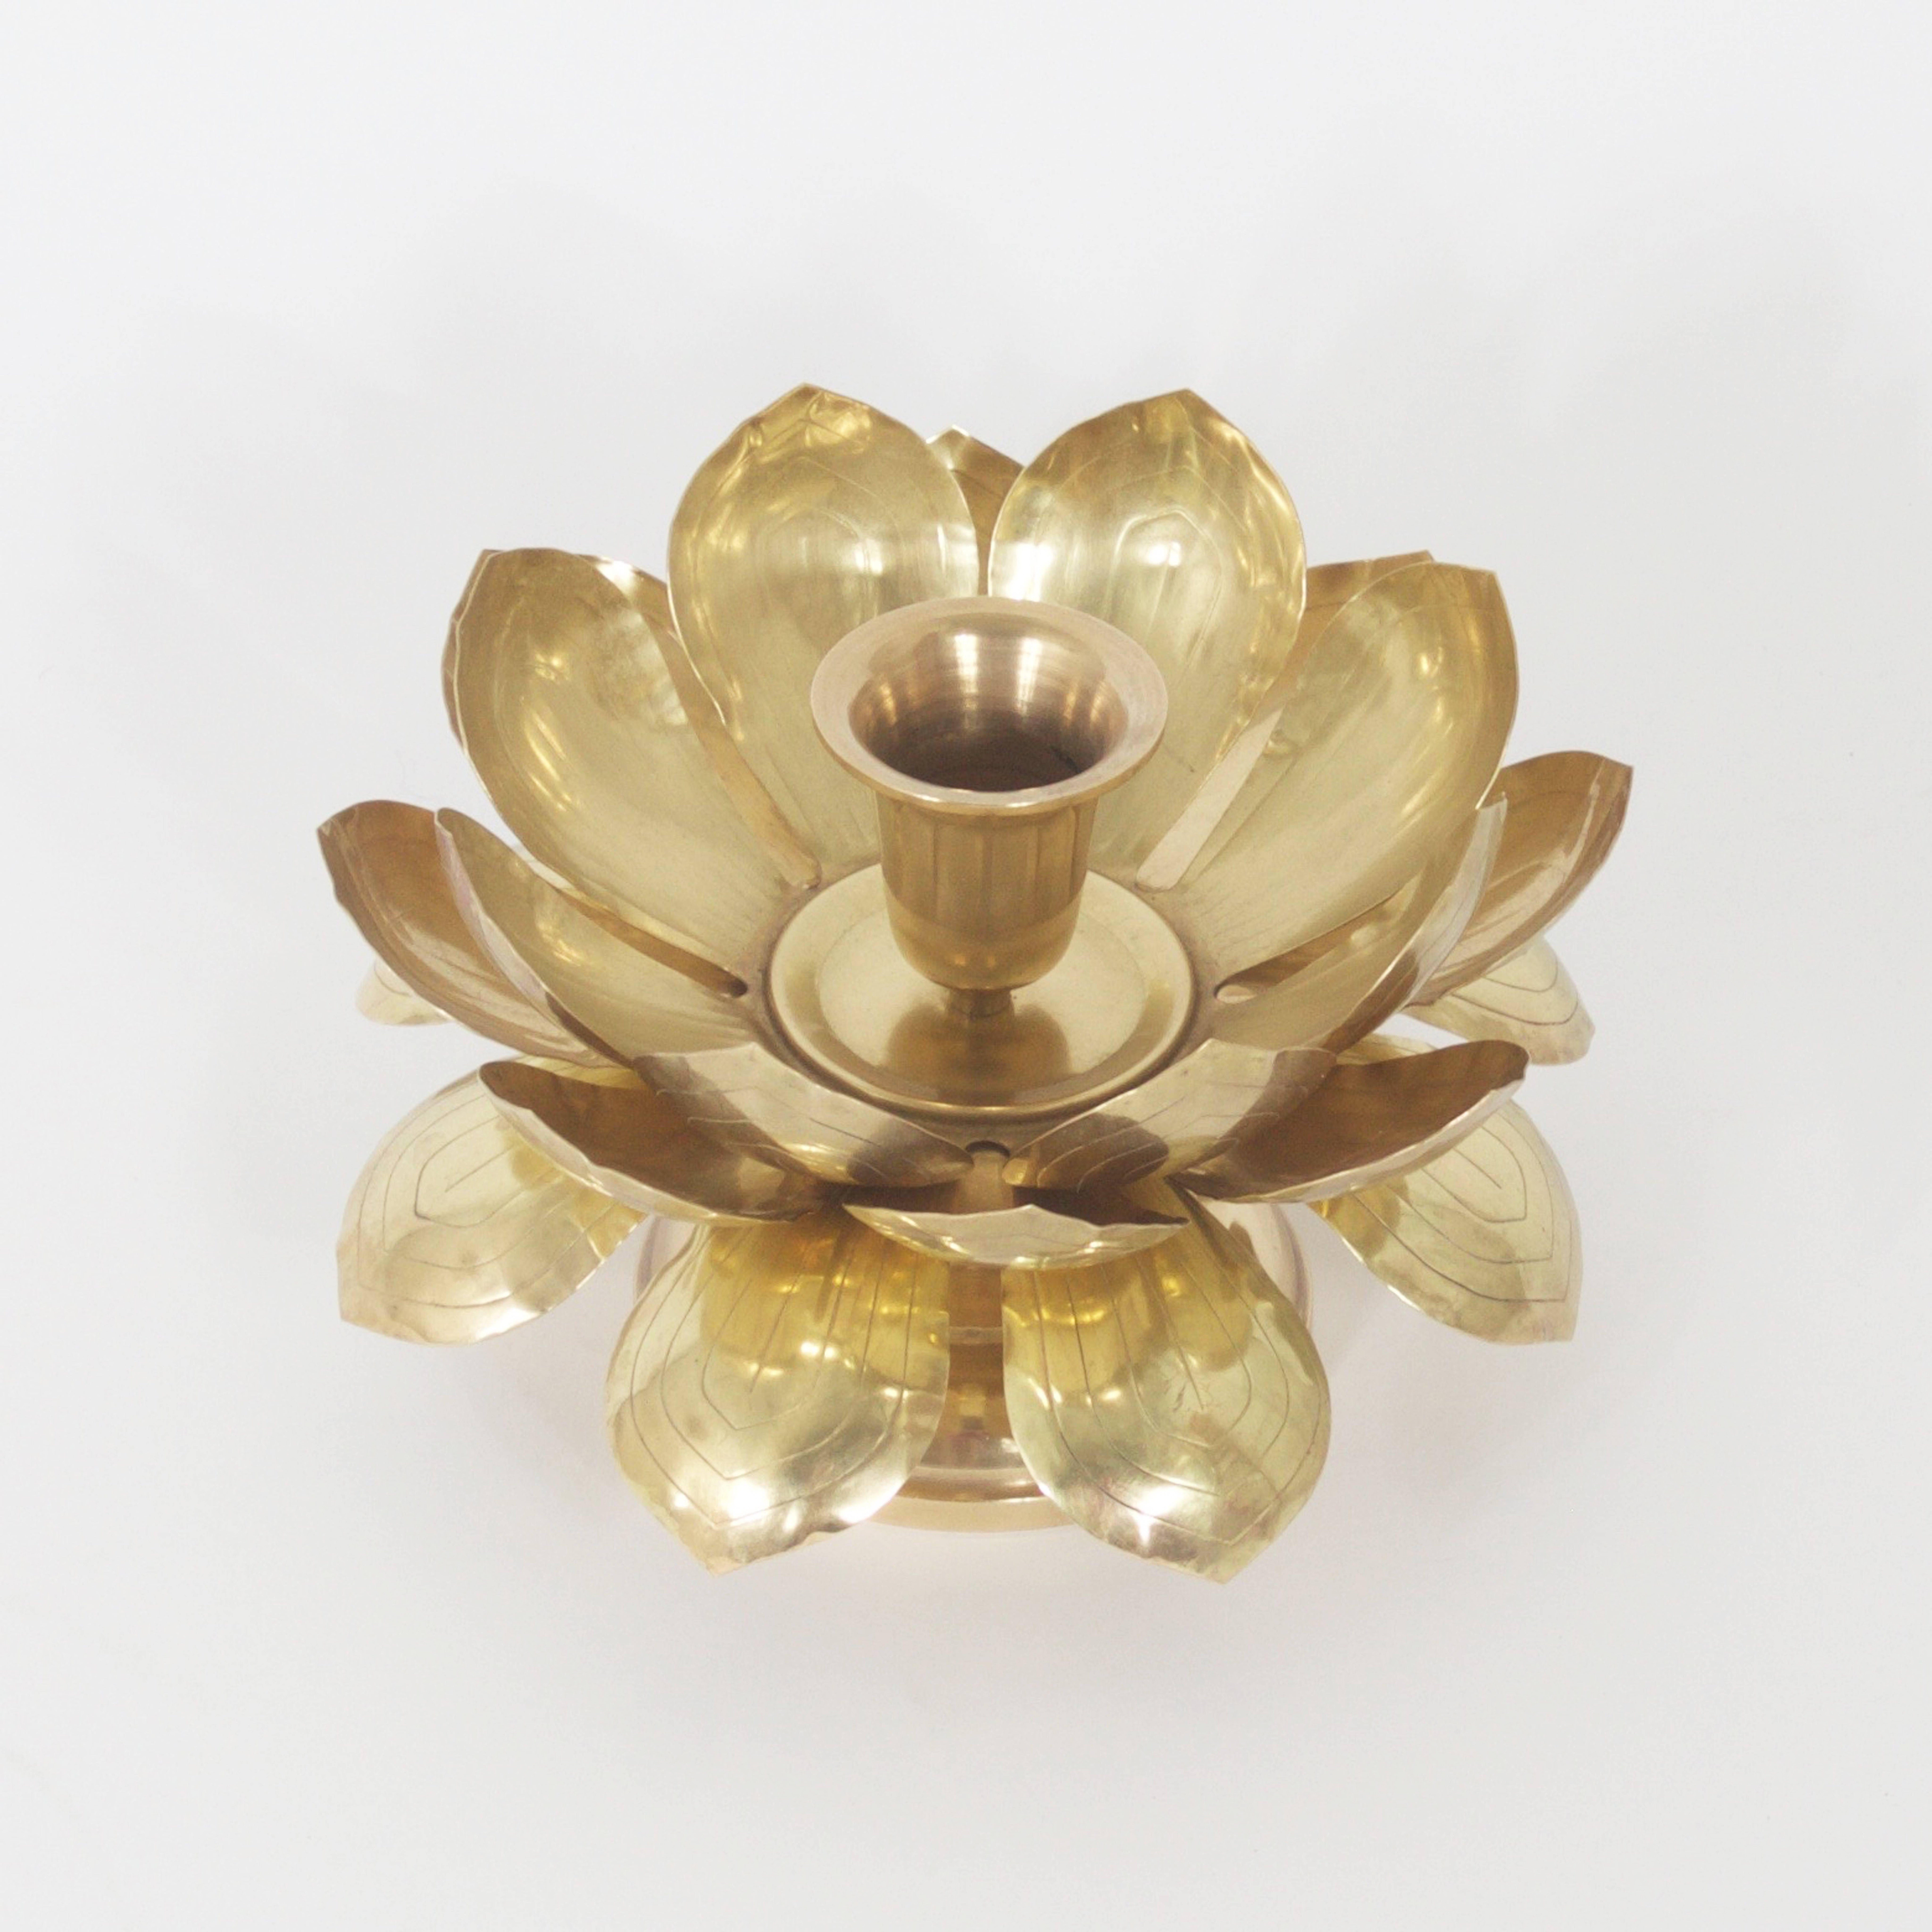 Exotic brass lotus flower candle holder with three layers of brass lotus leaves with stylized veins and pointed tips. This candle holder has a cast brass classical foot and cup. Newly polished. Probably Feldman.
